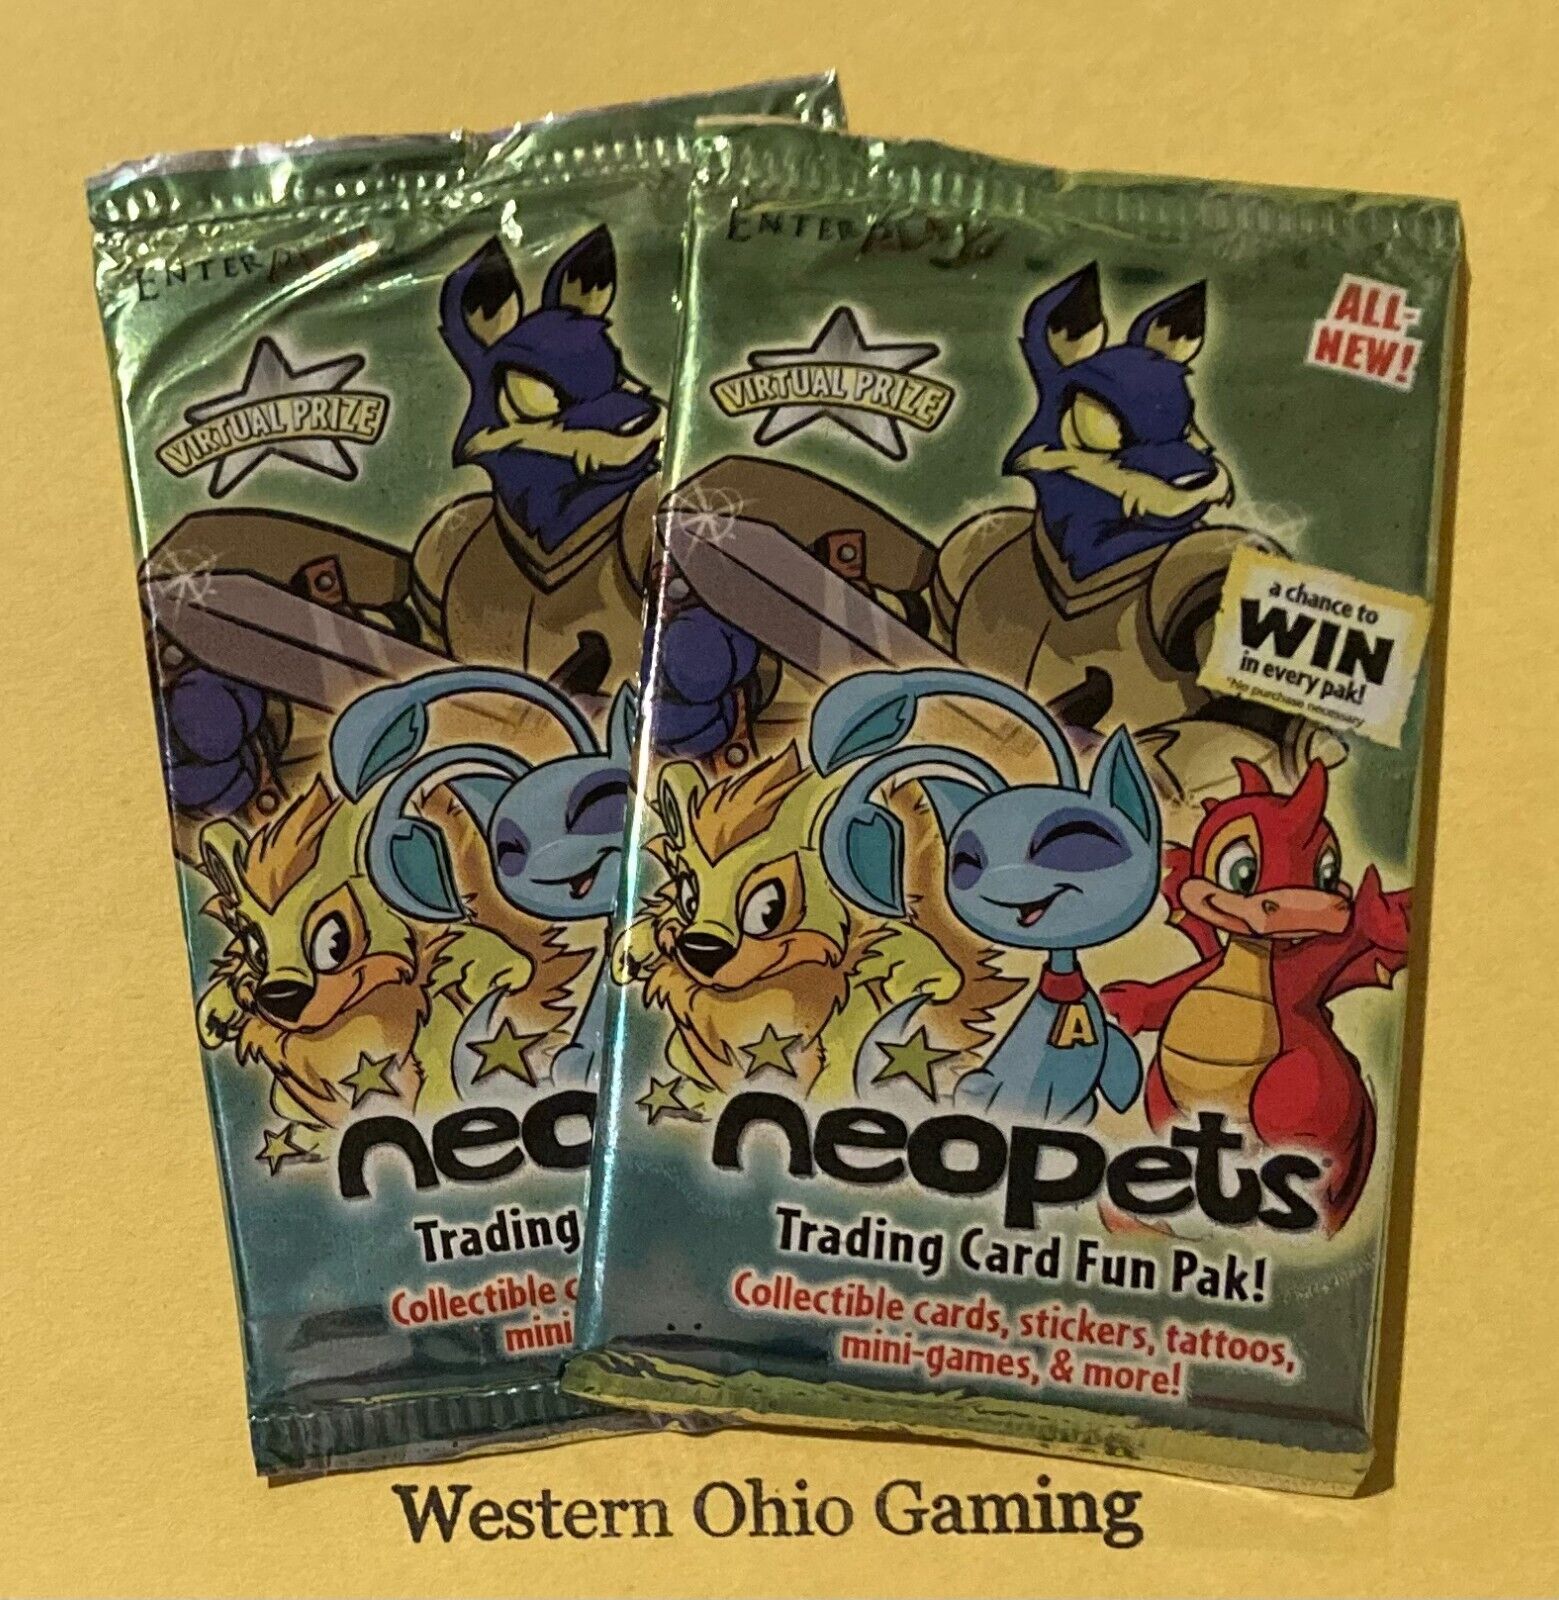 Neopets Trading Card Fun Pak x 2 NEW Pack